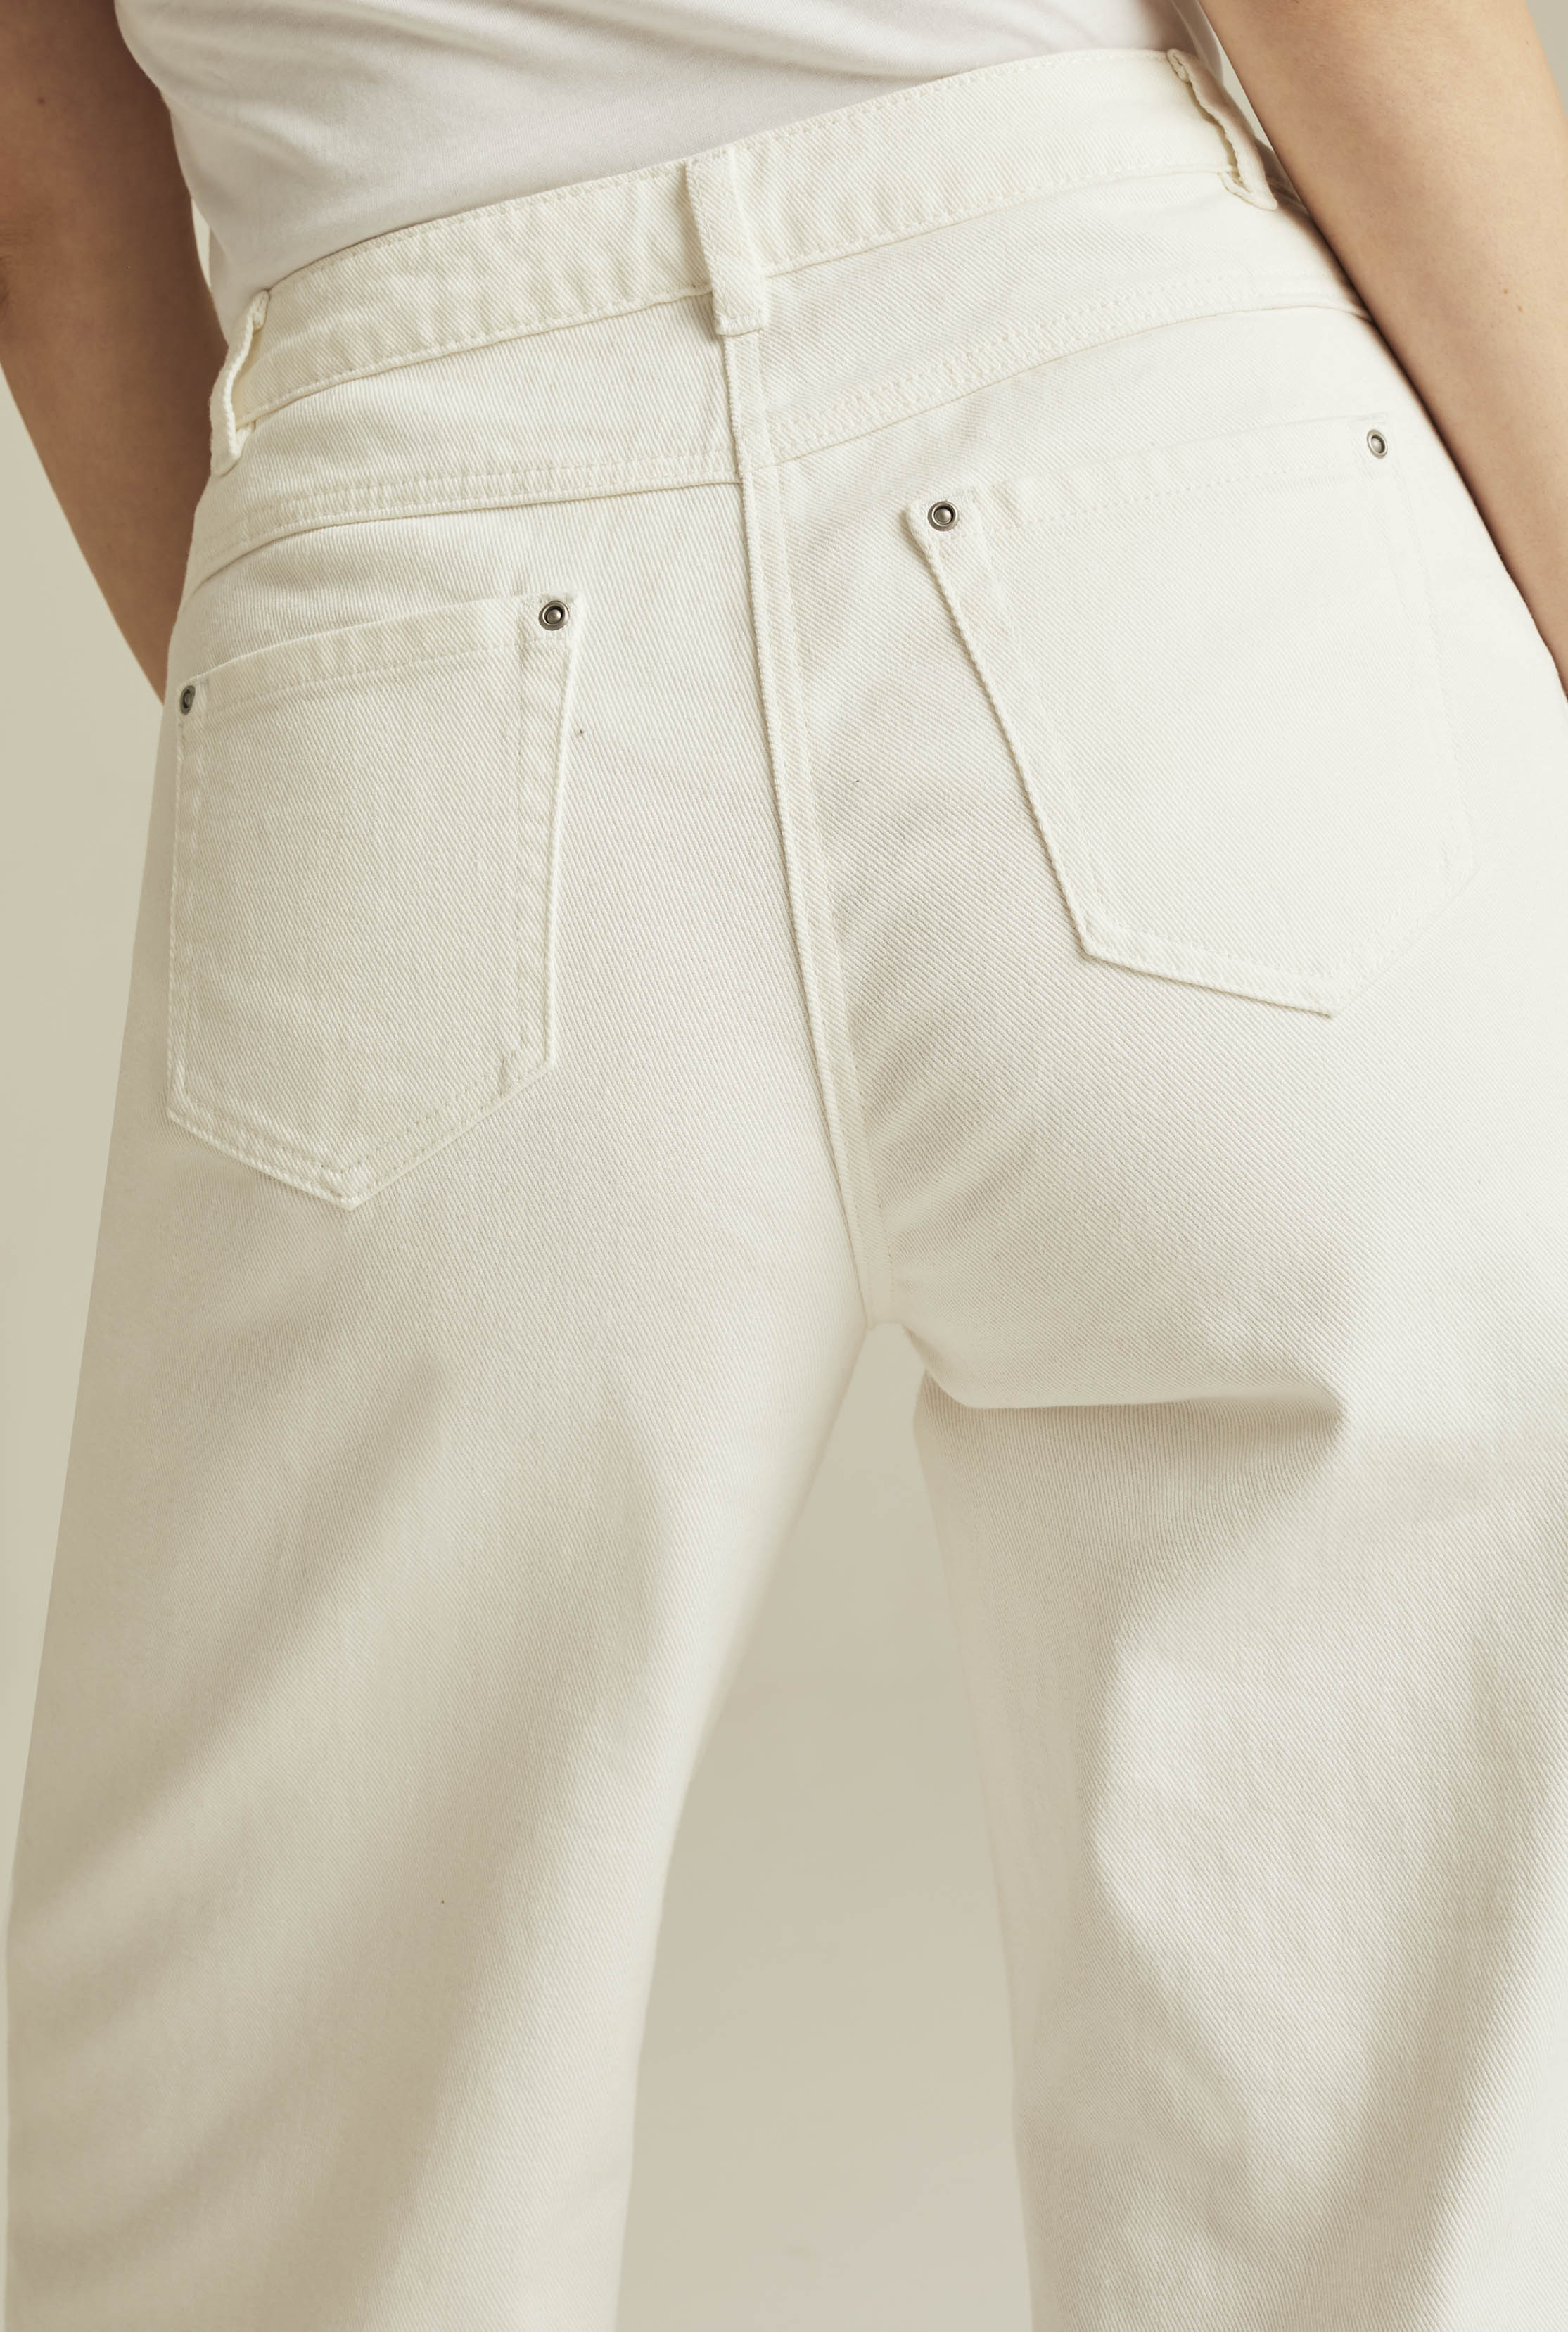 White Wide Leg Cropped Jeans | Long Tall Sally